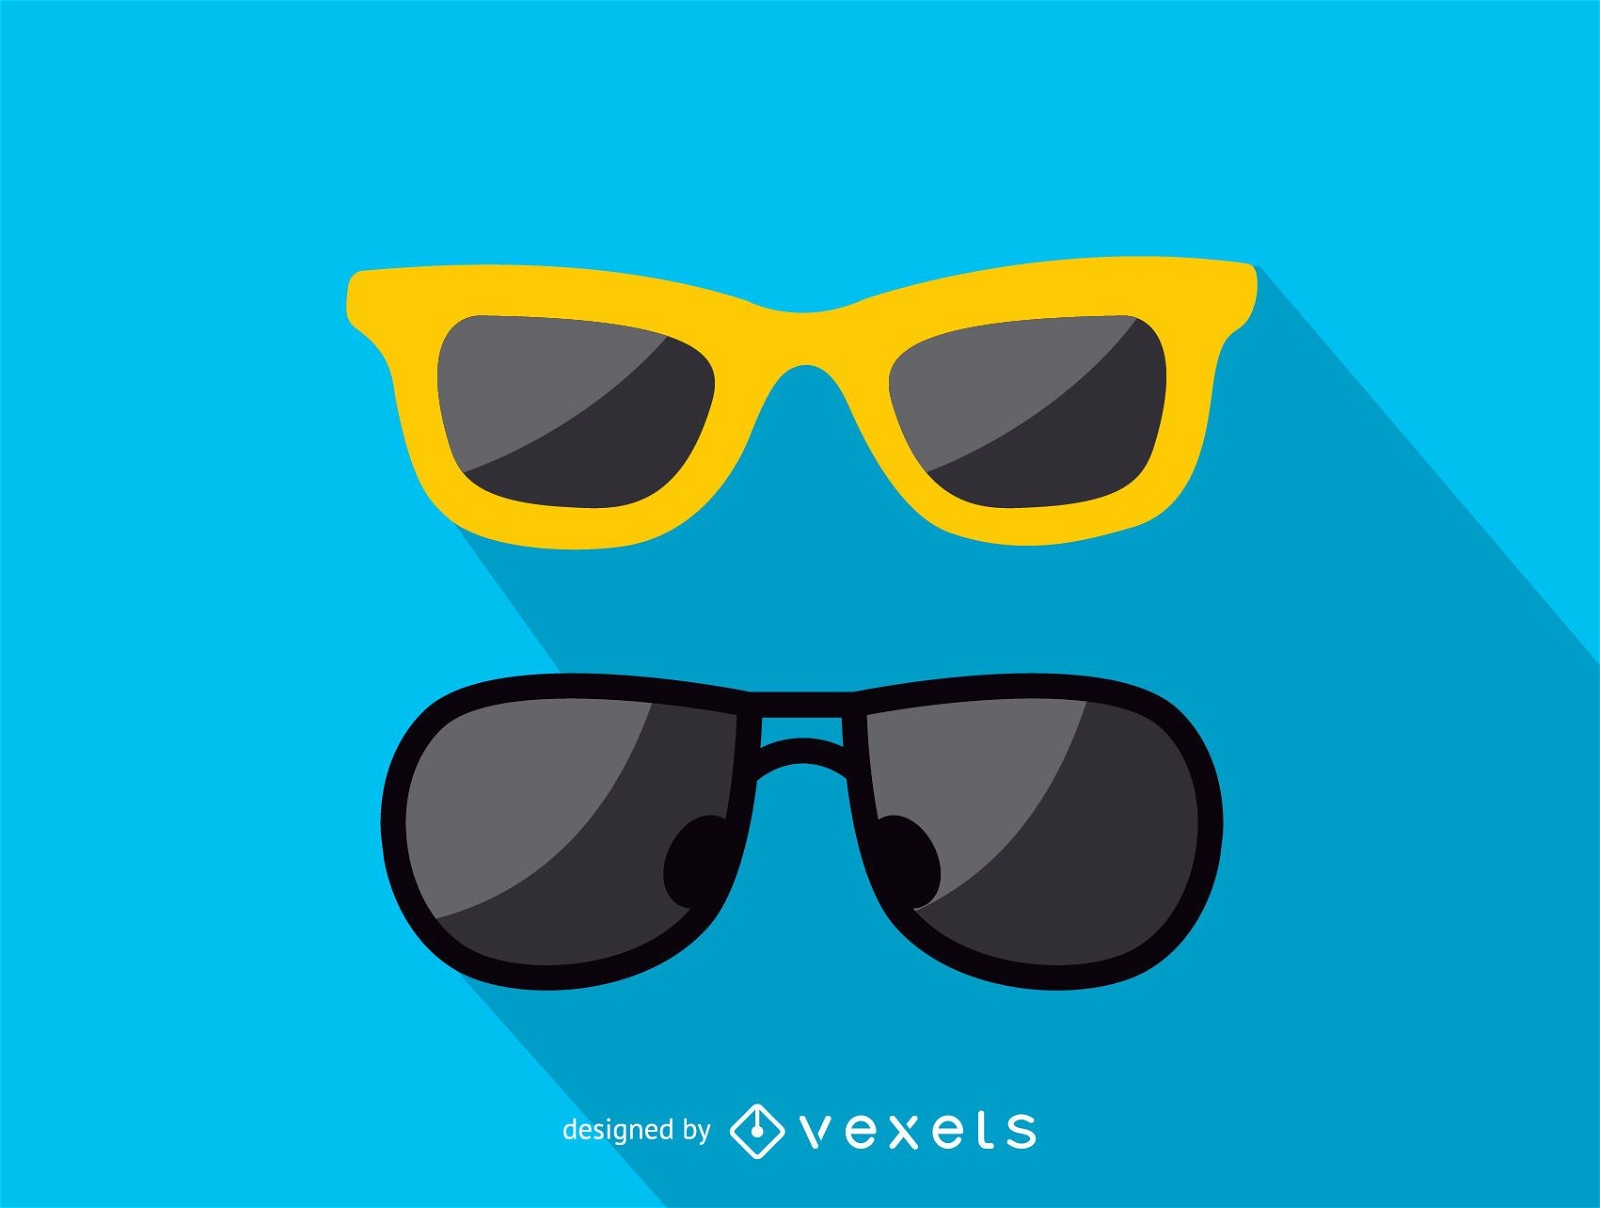 Two sunglasses pairs icon